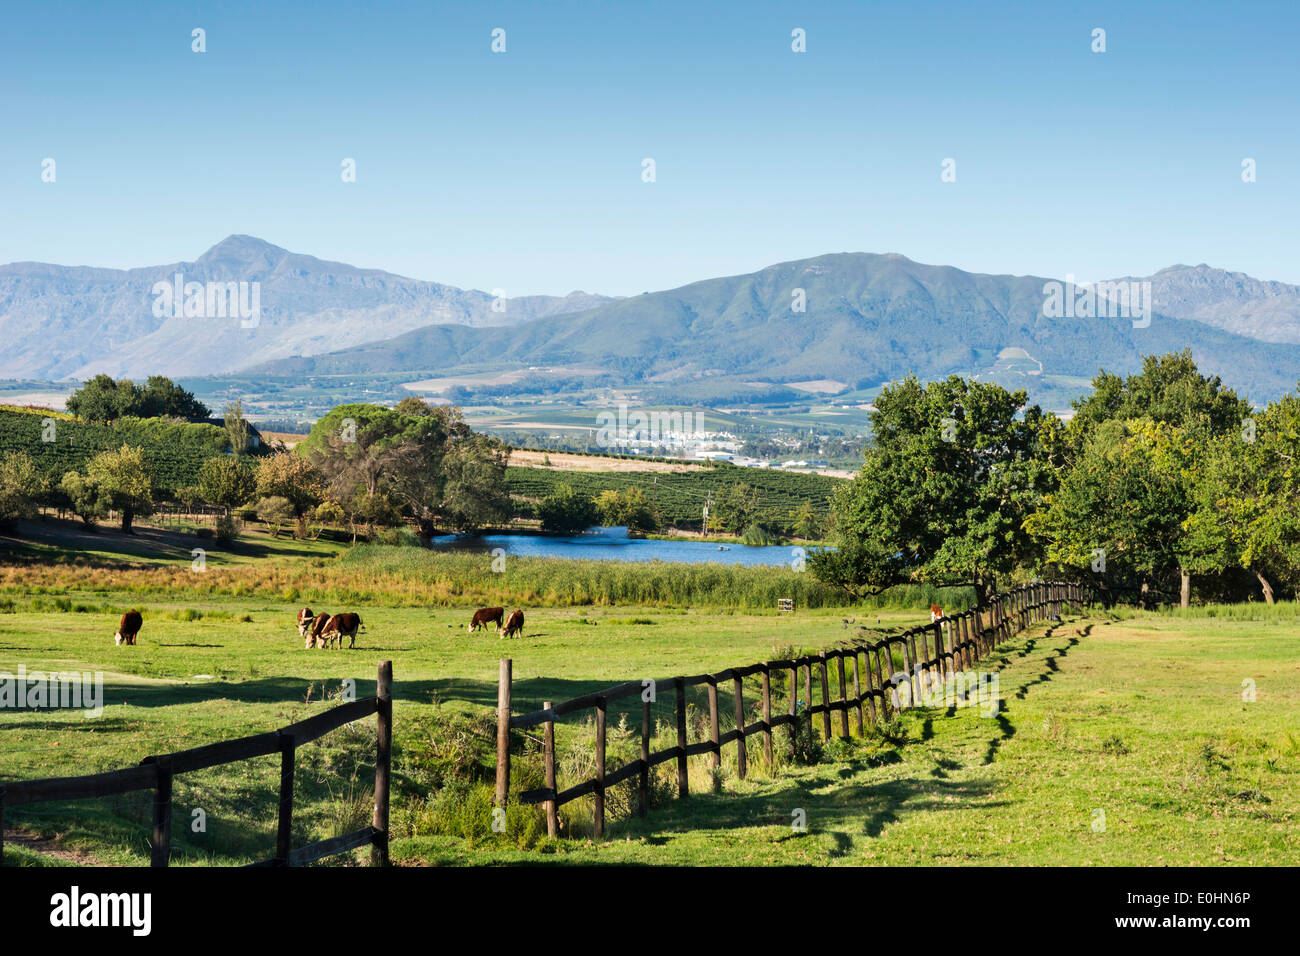 WIne country landscape with mountains, lake, fence and farm animals, Paarl, Western Cape, South Africa Stock Photo